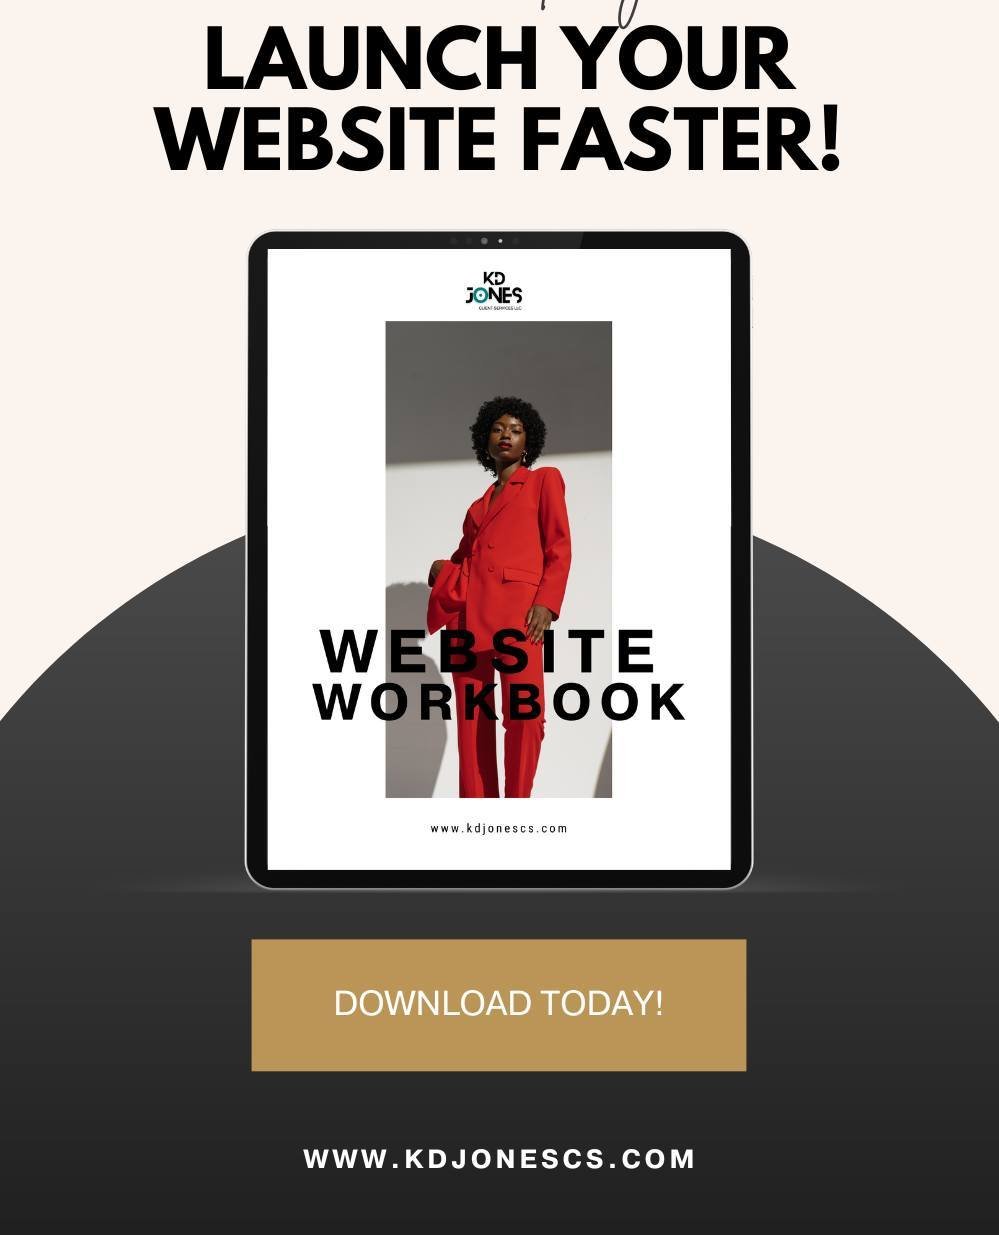 Our 30-page Website Workbook will guide you through organizing, mapping, and creating your website content to help you launch your website quickly. ⁠
⁠
Inside the workbook, you will find the following pages. Website Basics, Website Goals, Website Bud